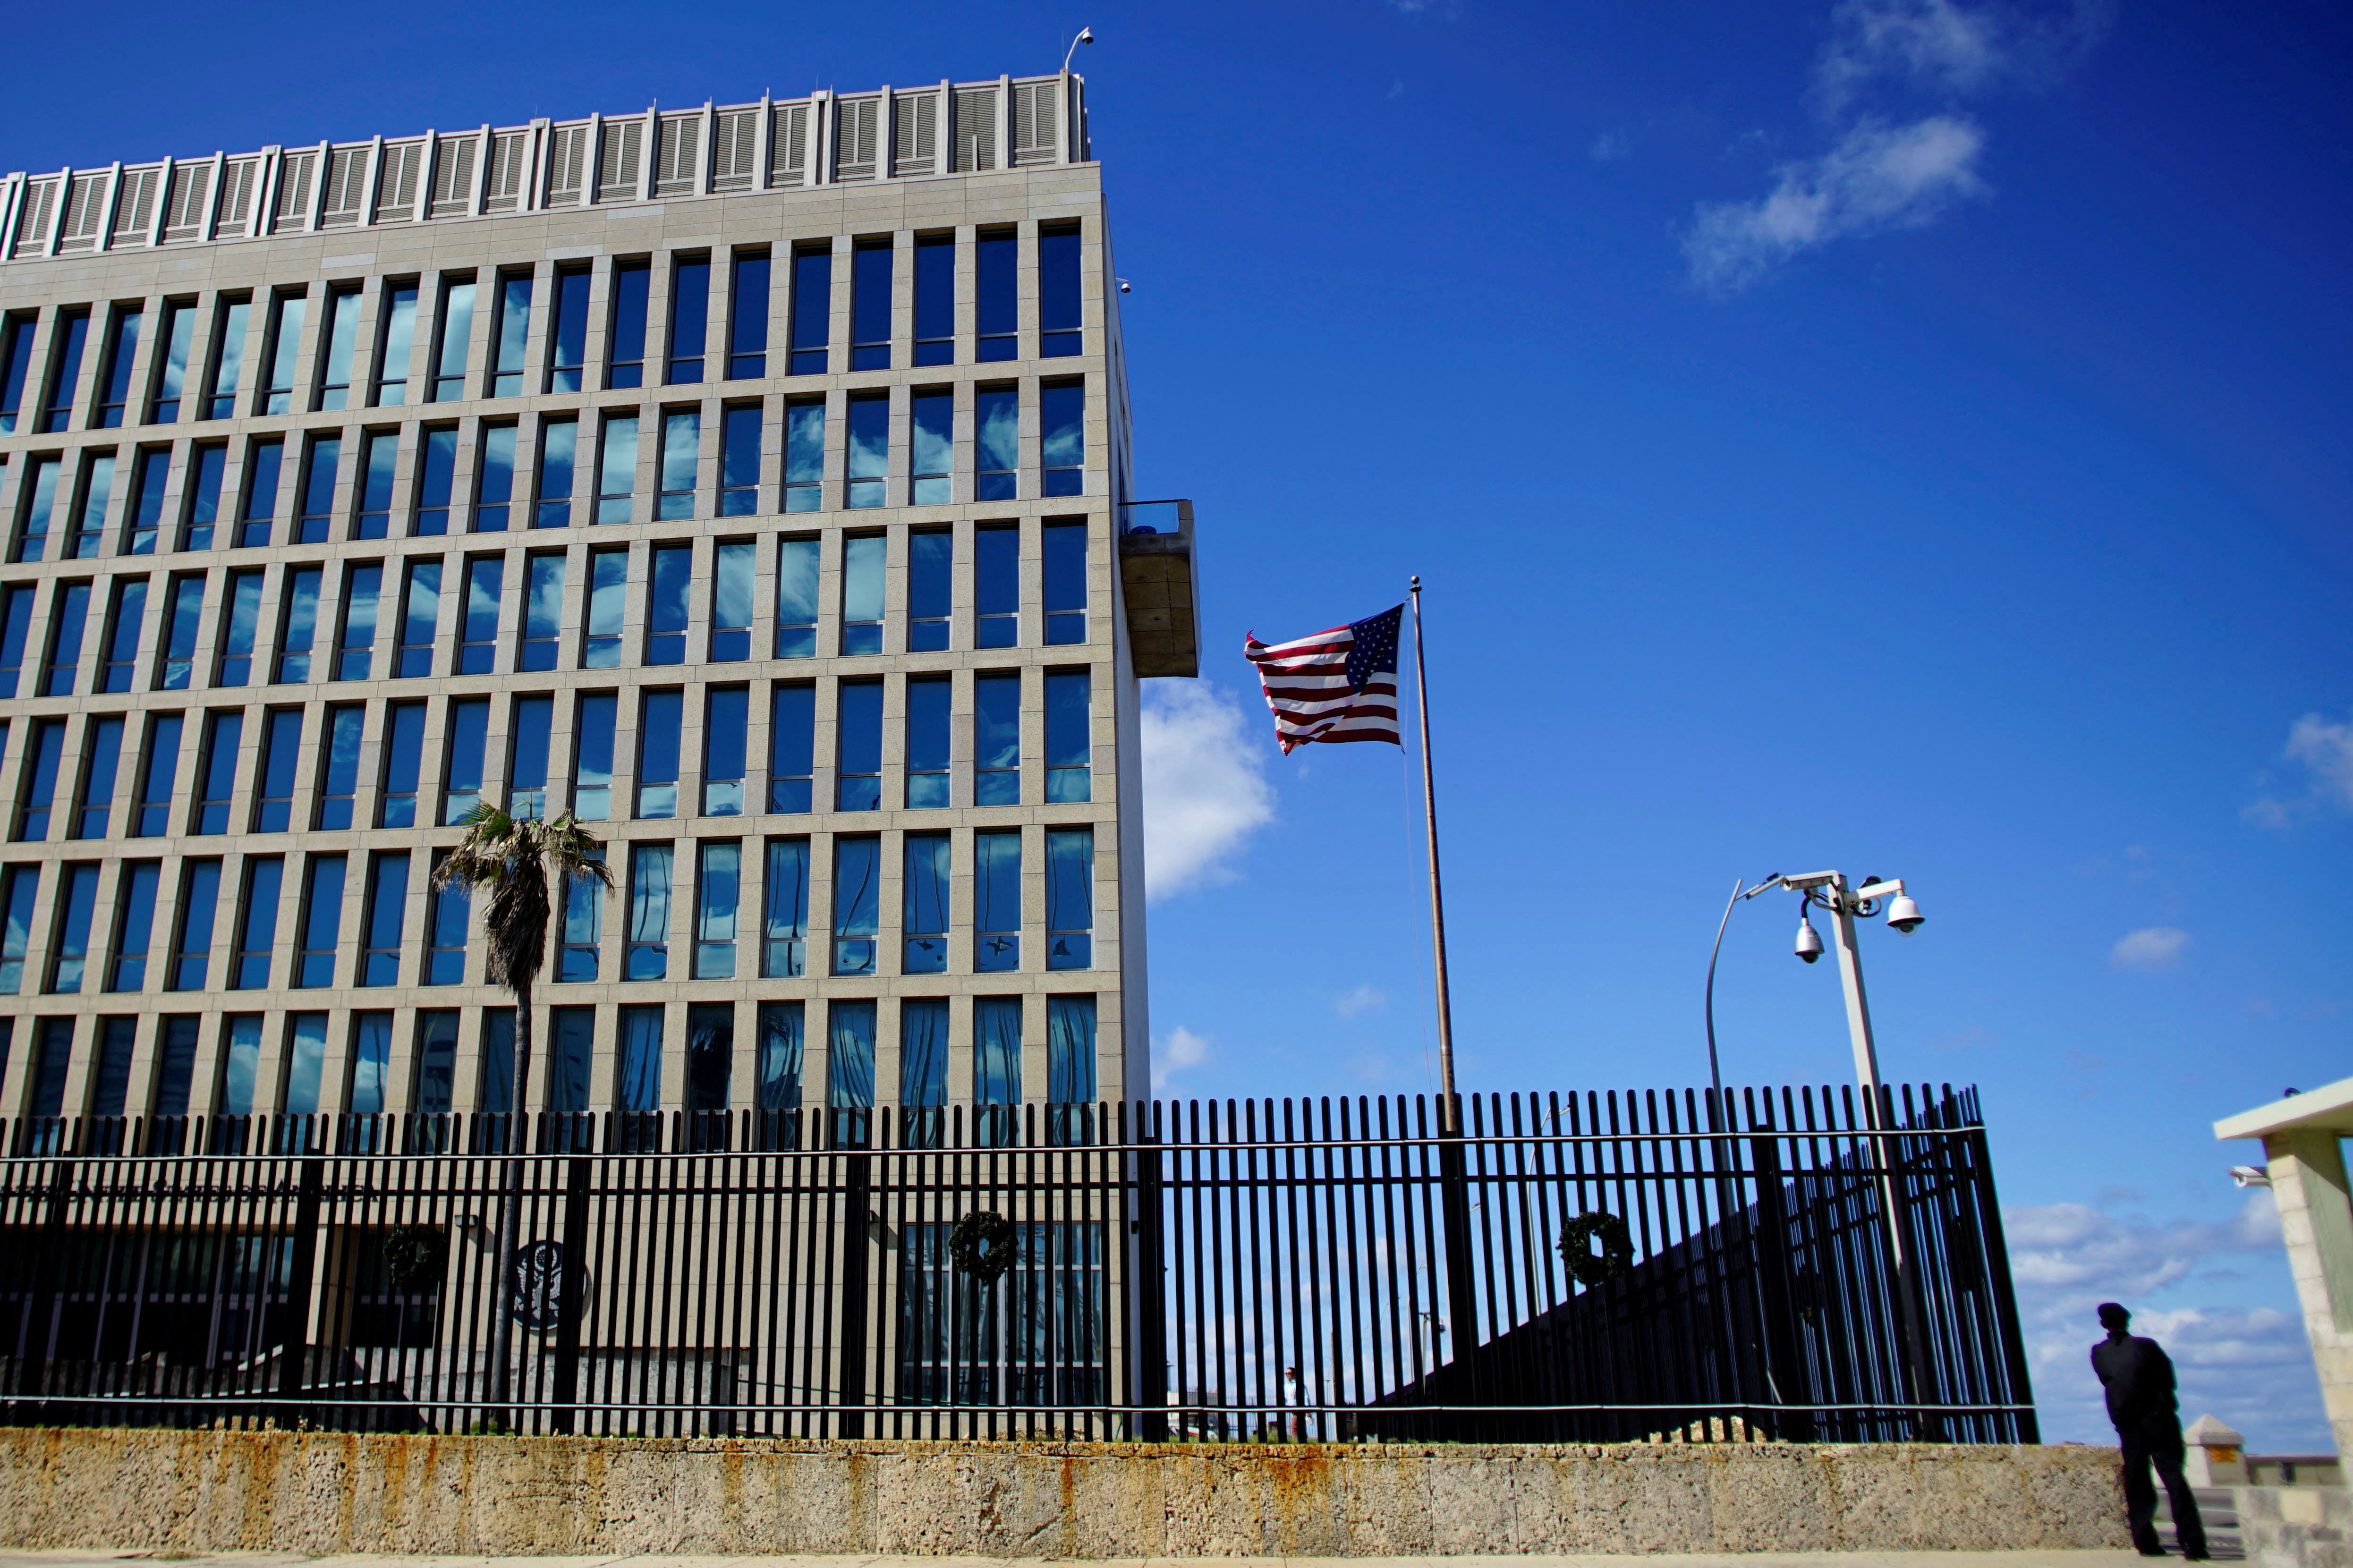 A security guard stands outside the U.S. Embassy in Havana